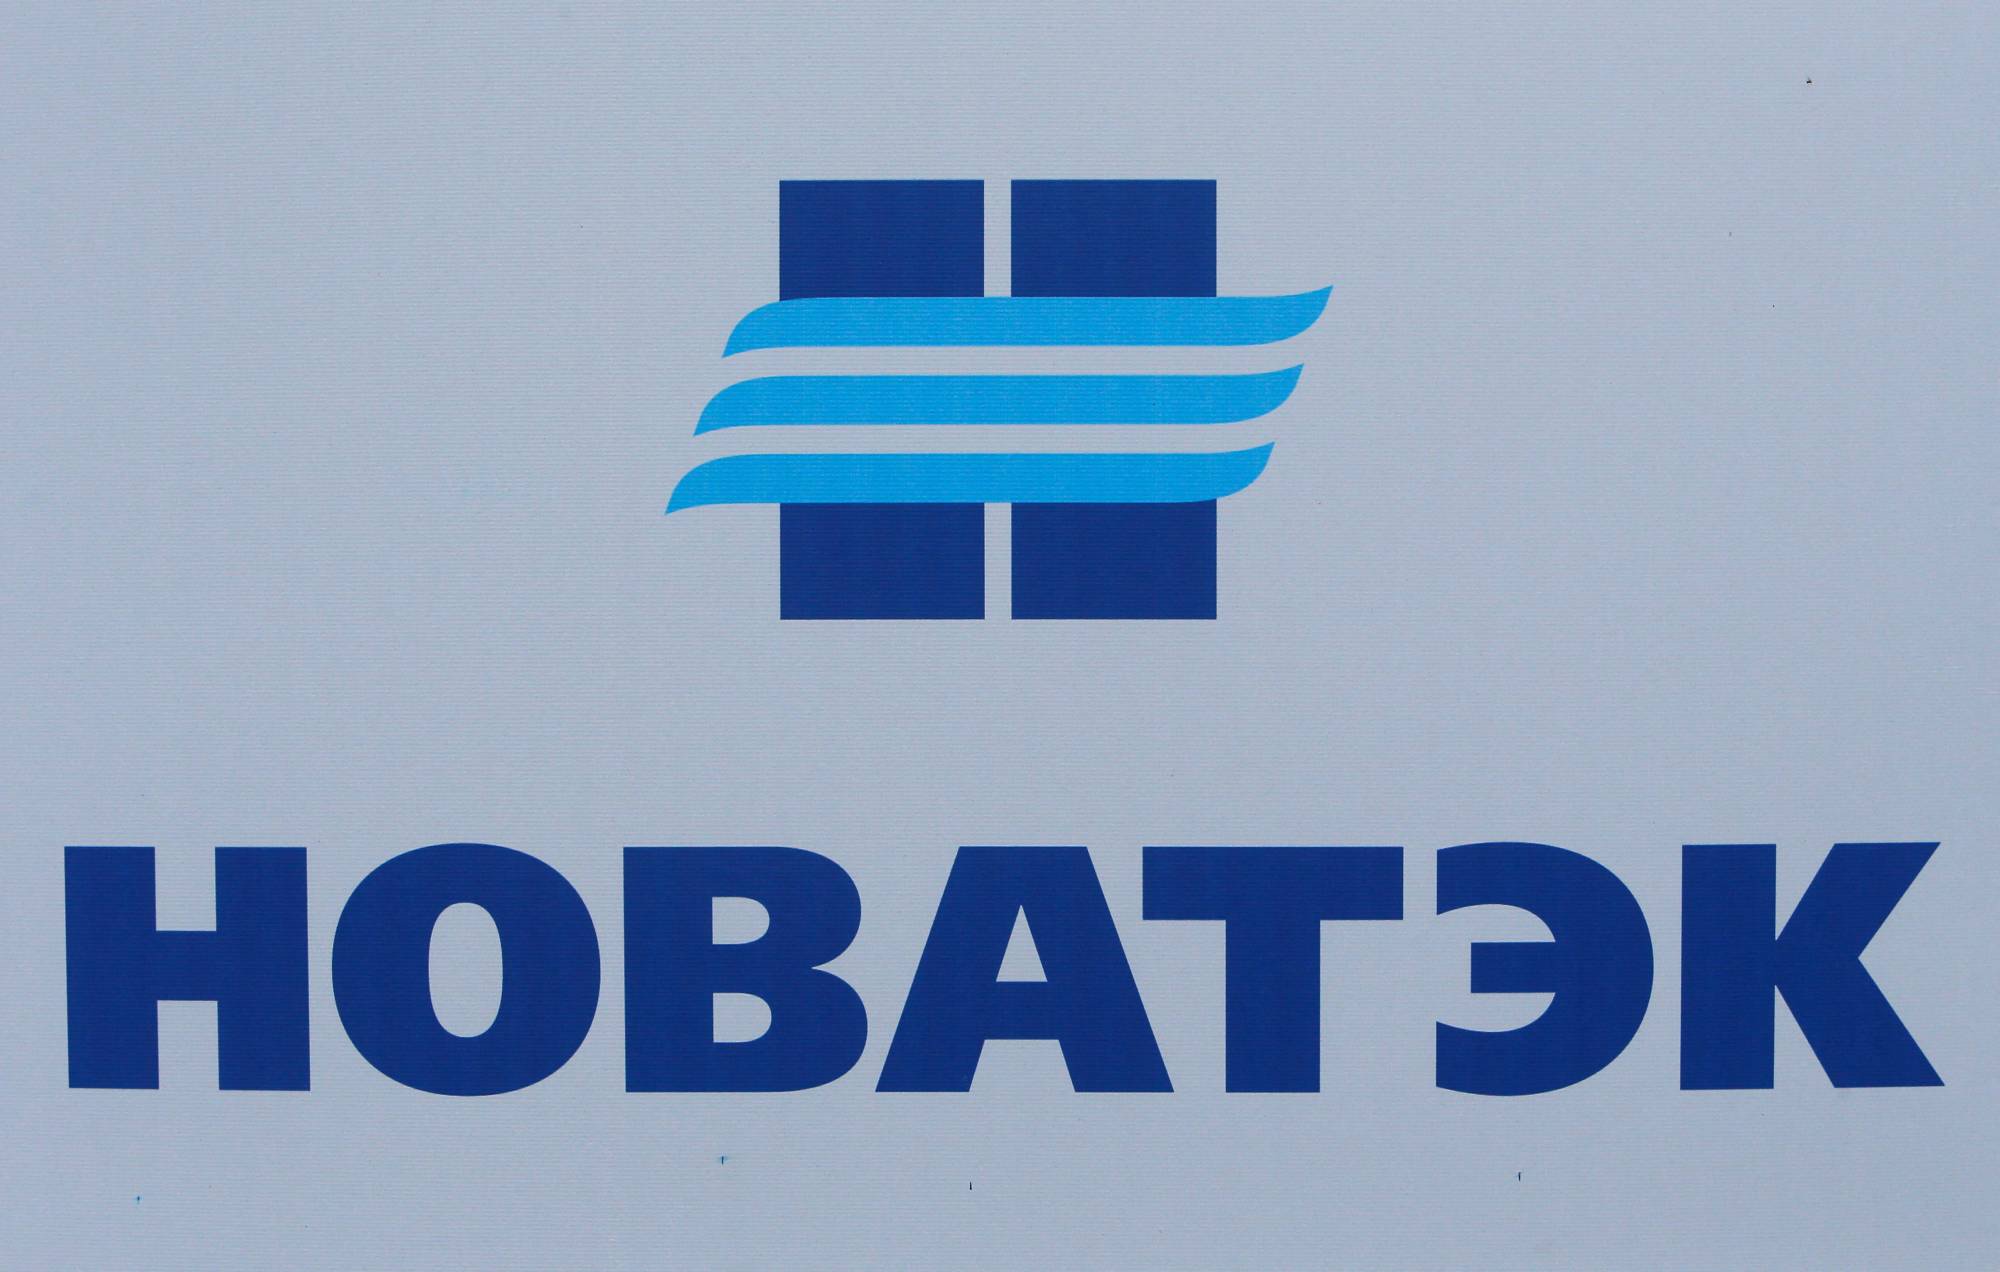 The logo of Russian gas producer Novatek is seen on a board during the St. Petersburg International Economic Forum in 2017. | REUTERS